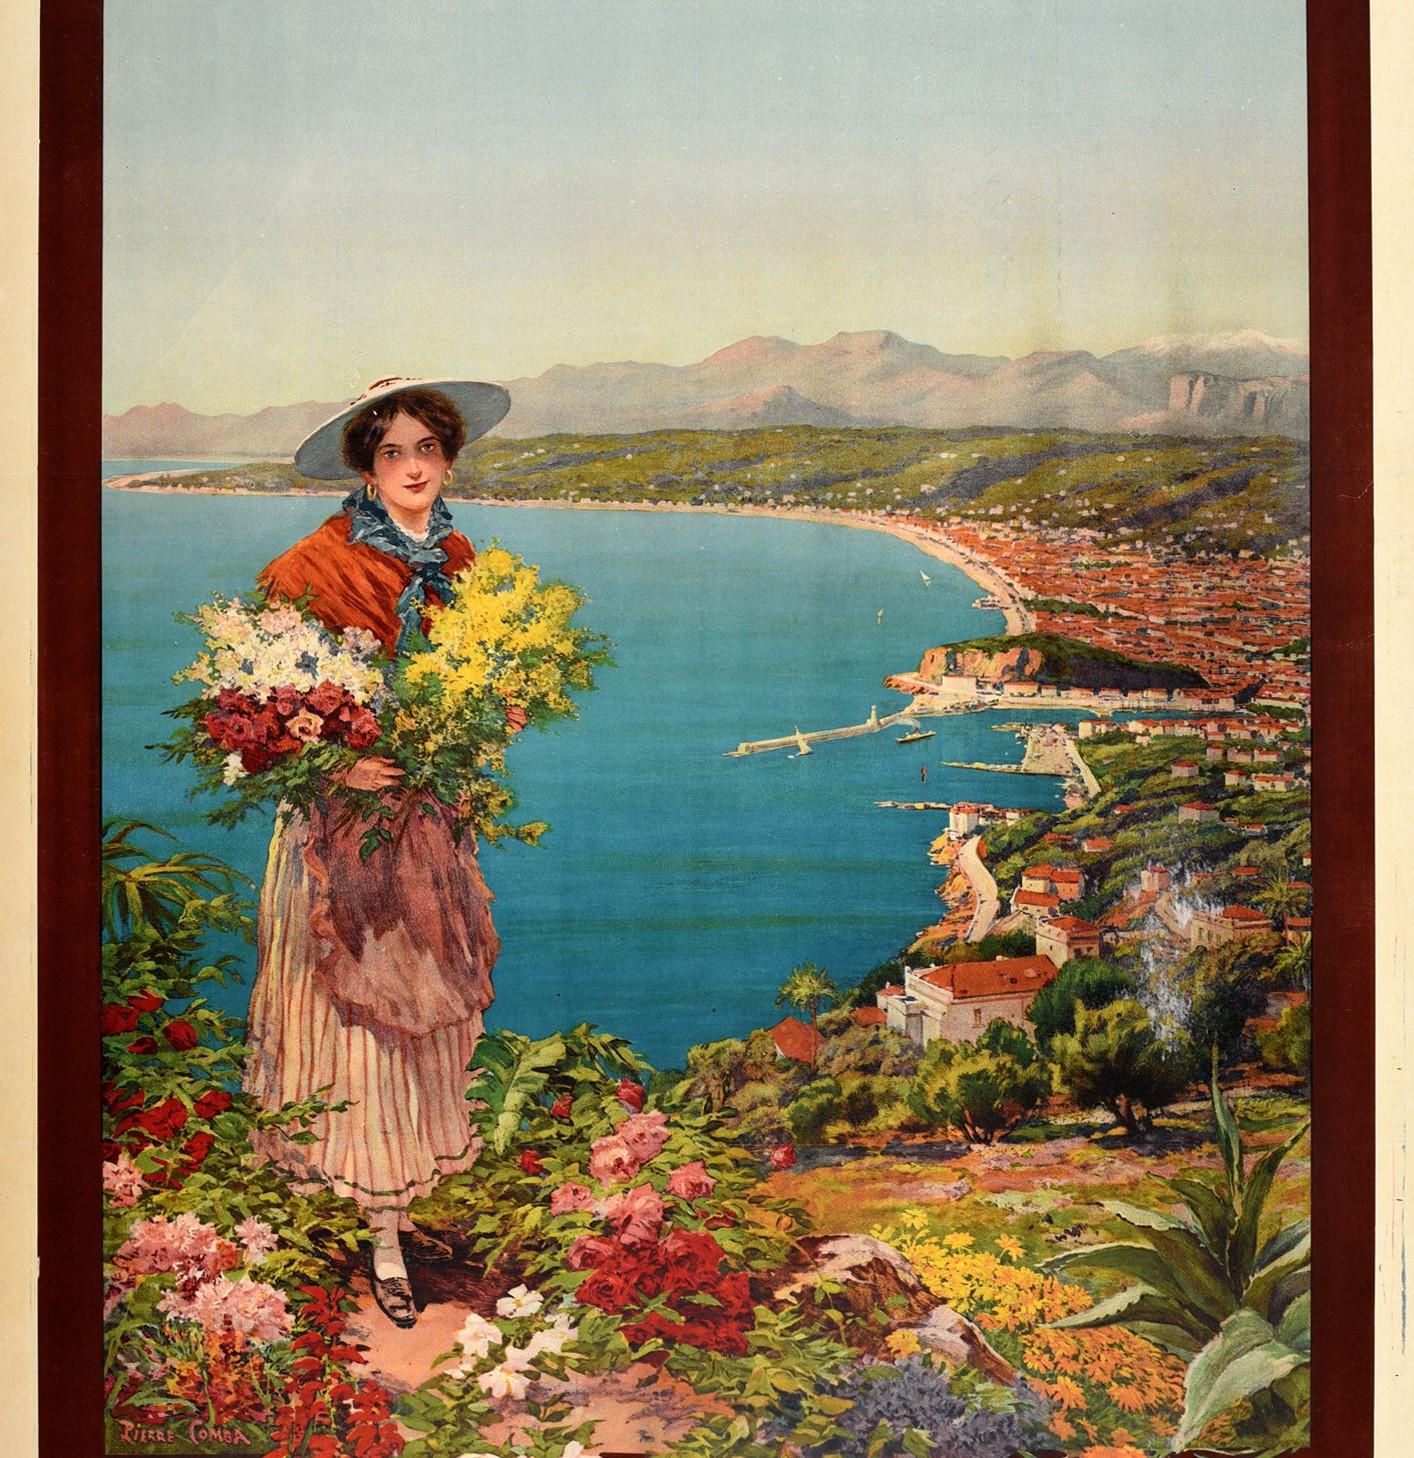 Original antique travel advertising poster for Nice Reine de la Cote D'Azur Fetes Sports Tourisme / Queen of the French Riviera Holidays Sports Tourism featuring scenic artwork by Pierre Comba (1859-1934) depicting a young lady looking out to the